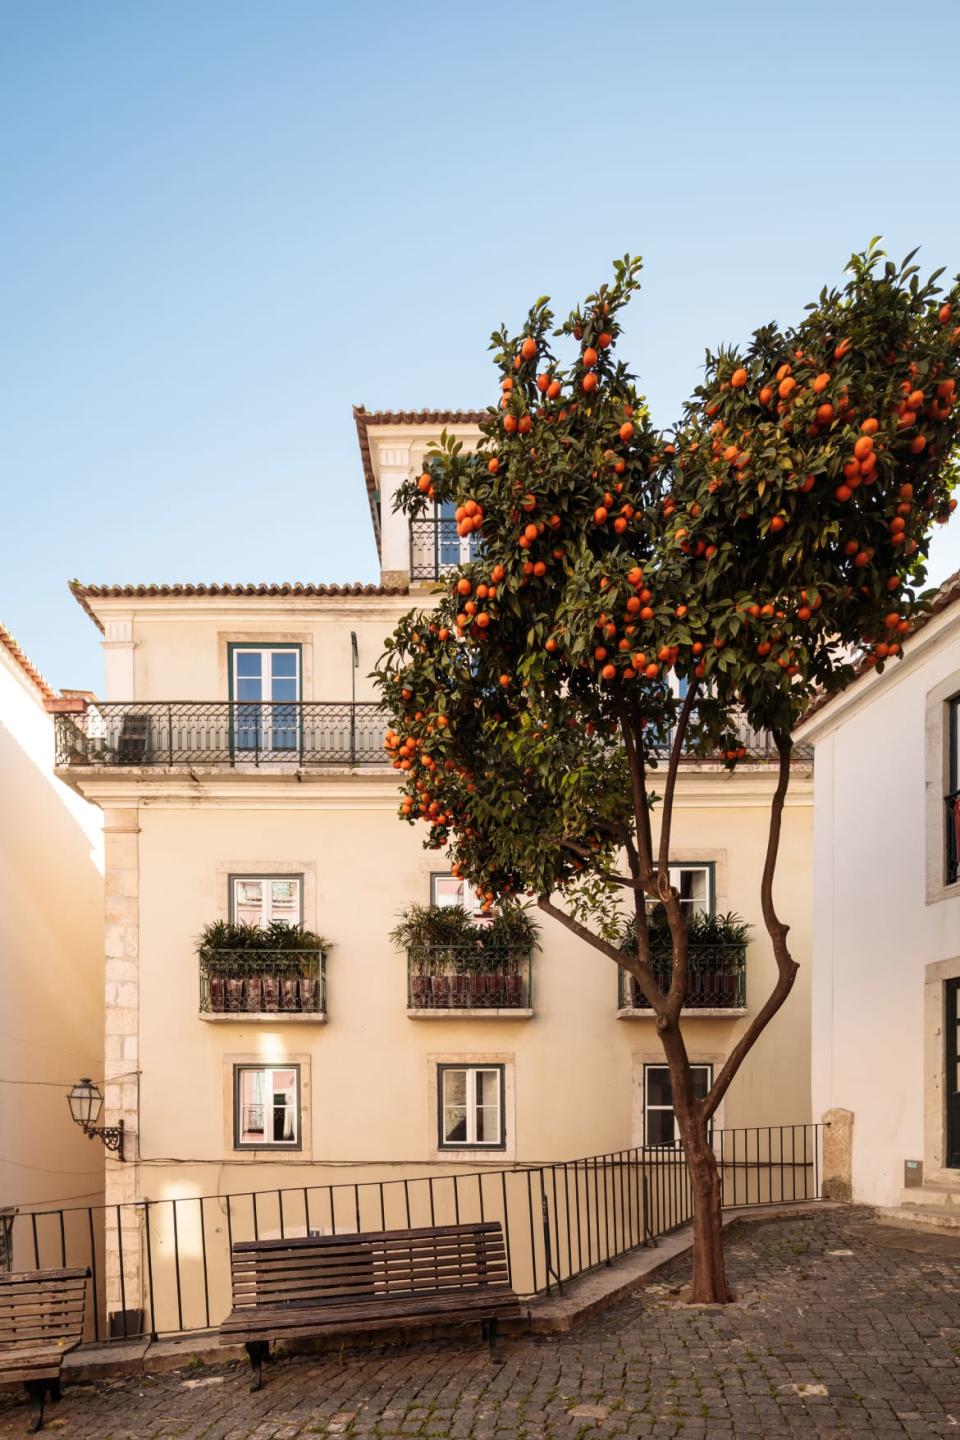 <div class="inline-image__caption"><p>Your new home may cost $4.3 million, but think about all the money you’ll save in oranges. But if the abundant citrus outside your window doesn’t fill you with comfort, rest your head easy at night knowing that while the travel influencers of the world may steal a week or two in Lisbon each year, you get to call this picturesque gem your full-time home.</p></div> <div class="inline-image__credit">Christie’s International Real Estate</div>